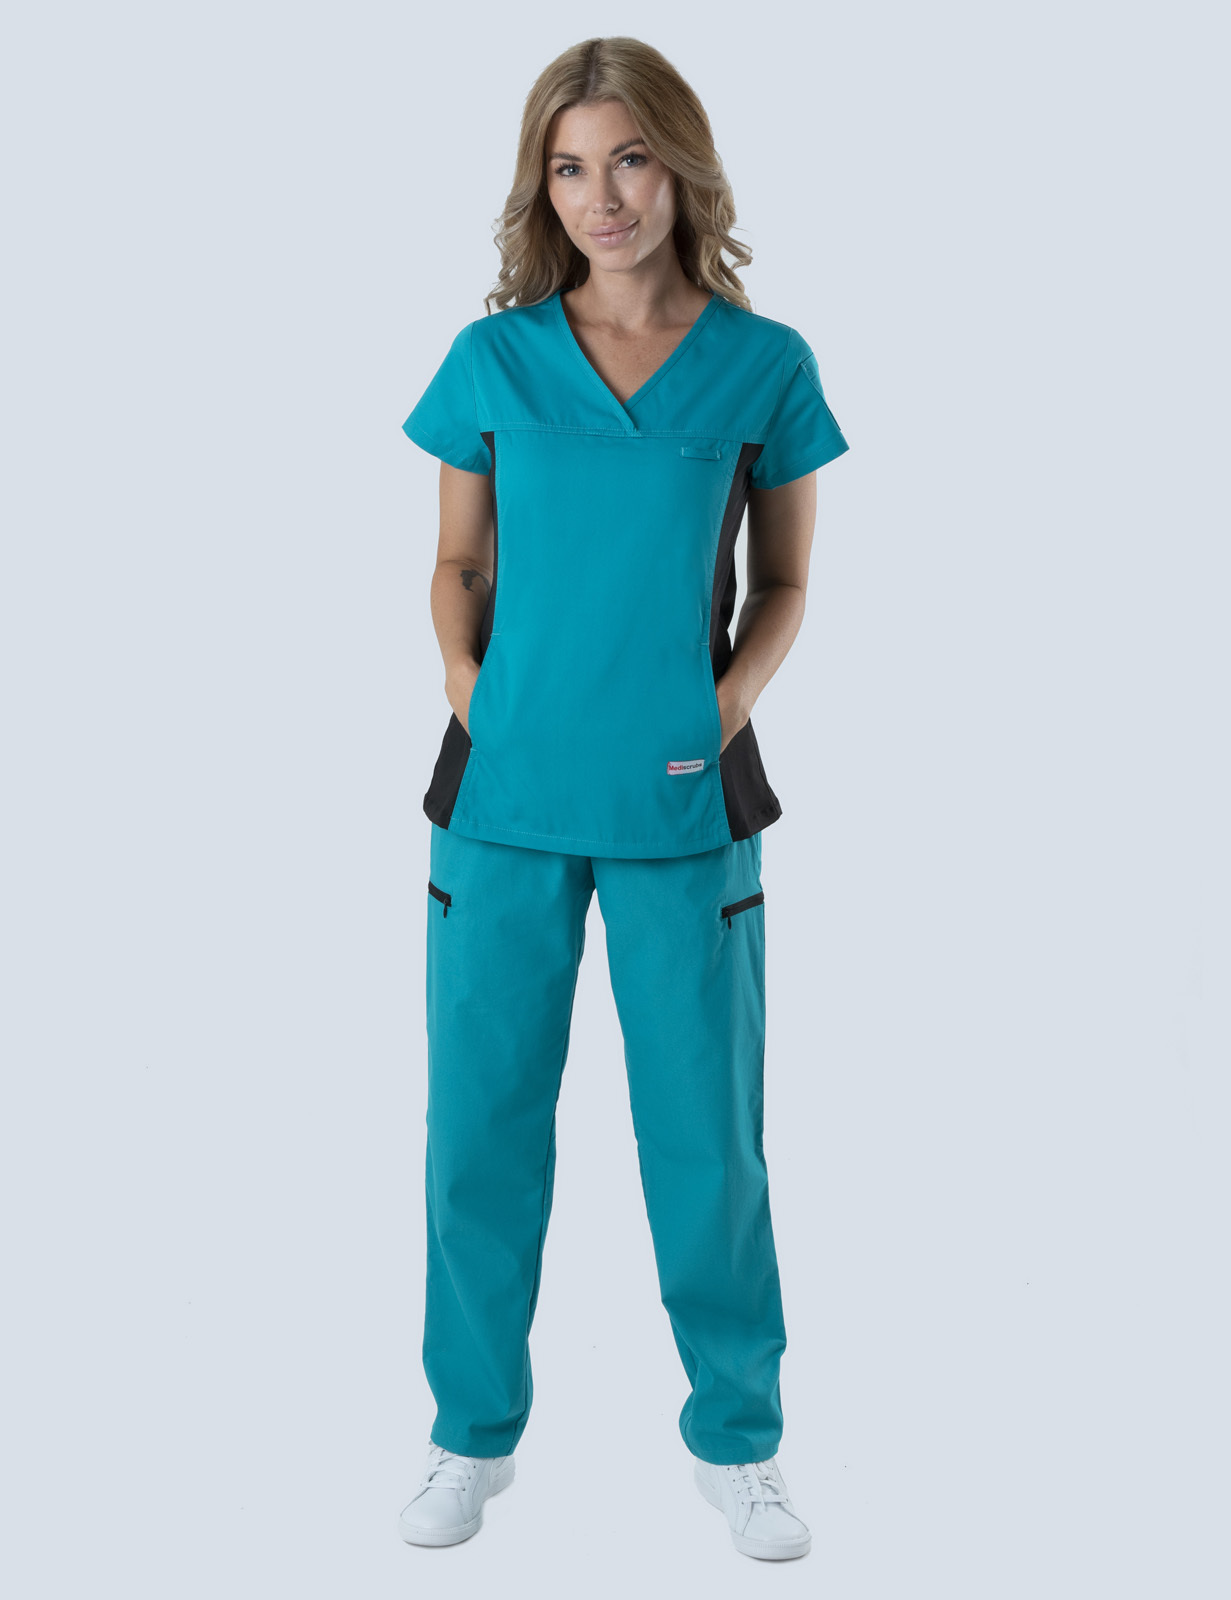 Mackay Hospital - ED Doctor (Women's Fit Spandex Scrub Top and Cargo Pants in Teal incl Logos)